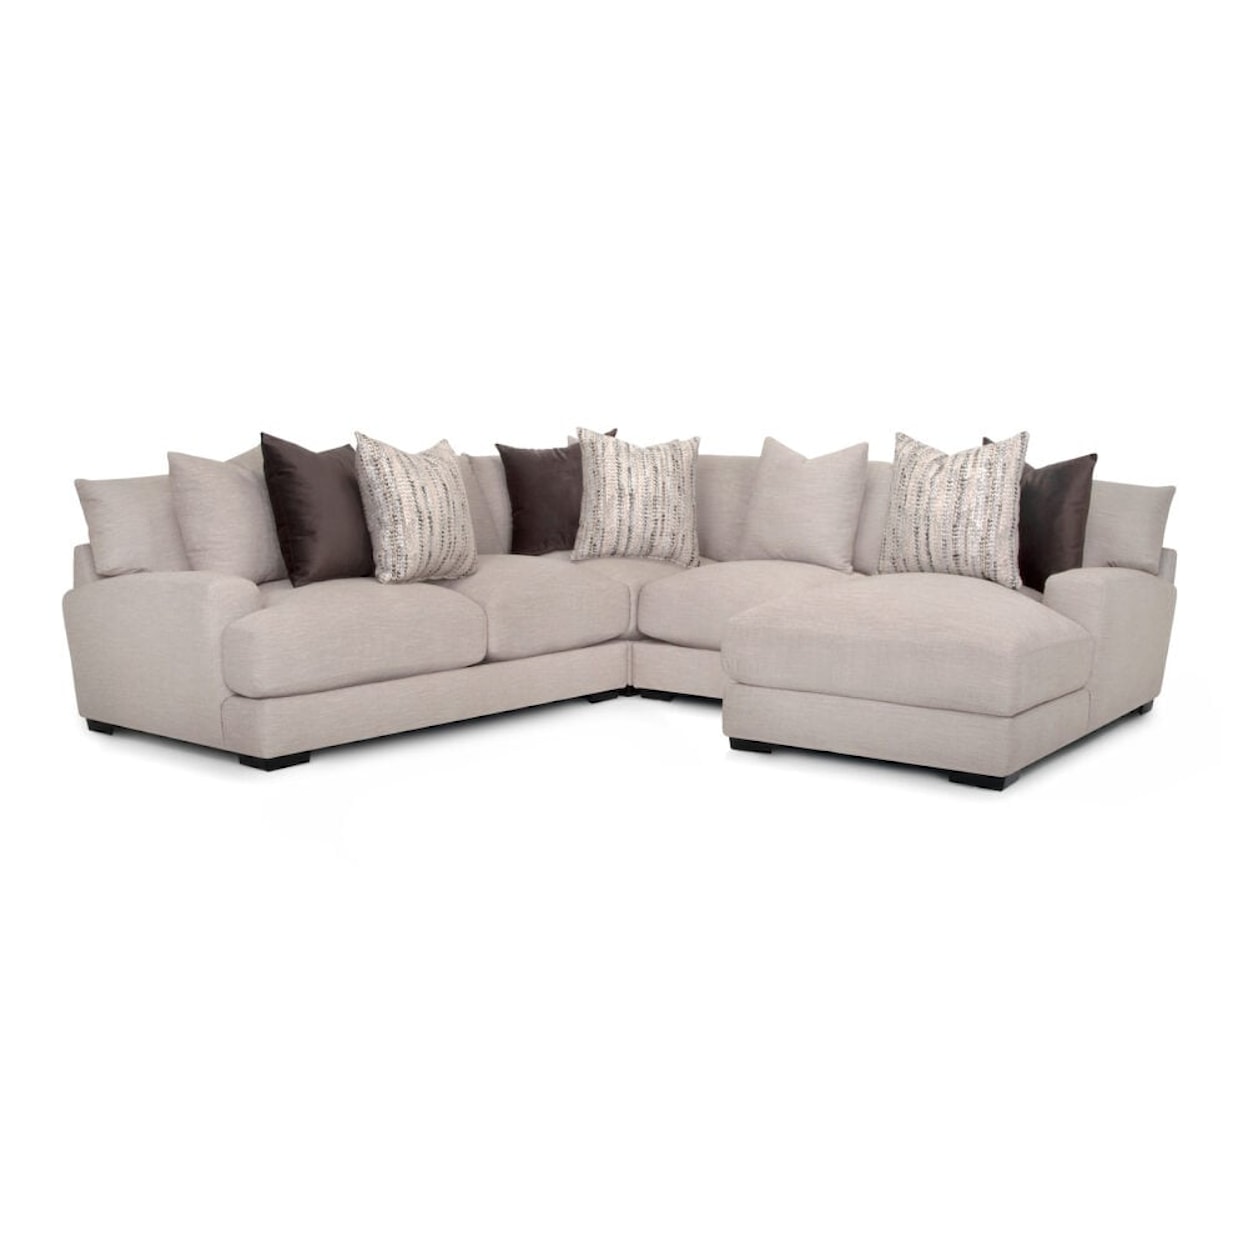 Franklin 808 Hannigan Chaise Sectional Sofa